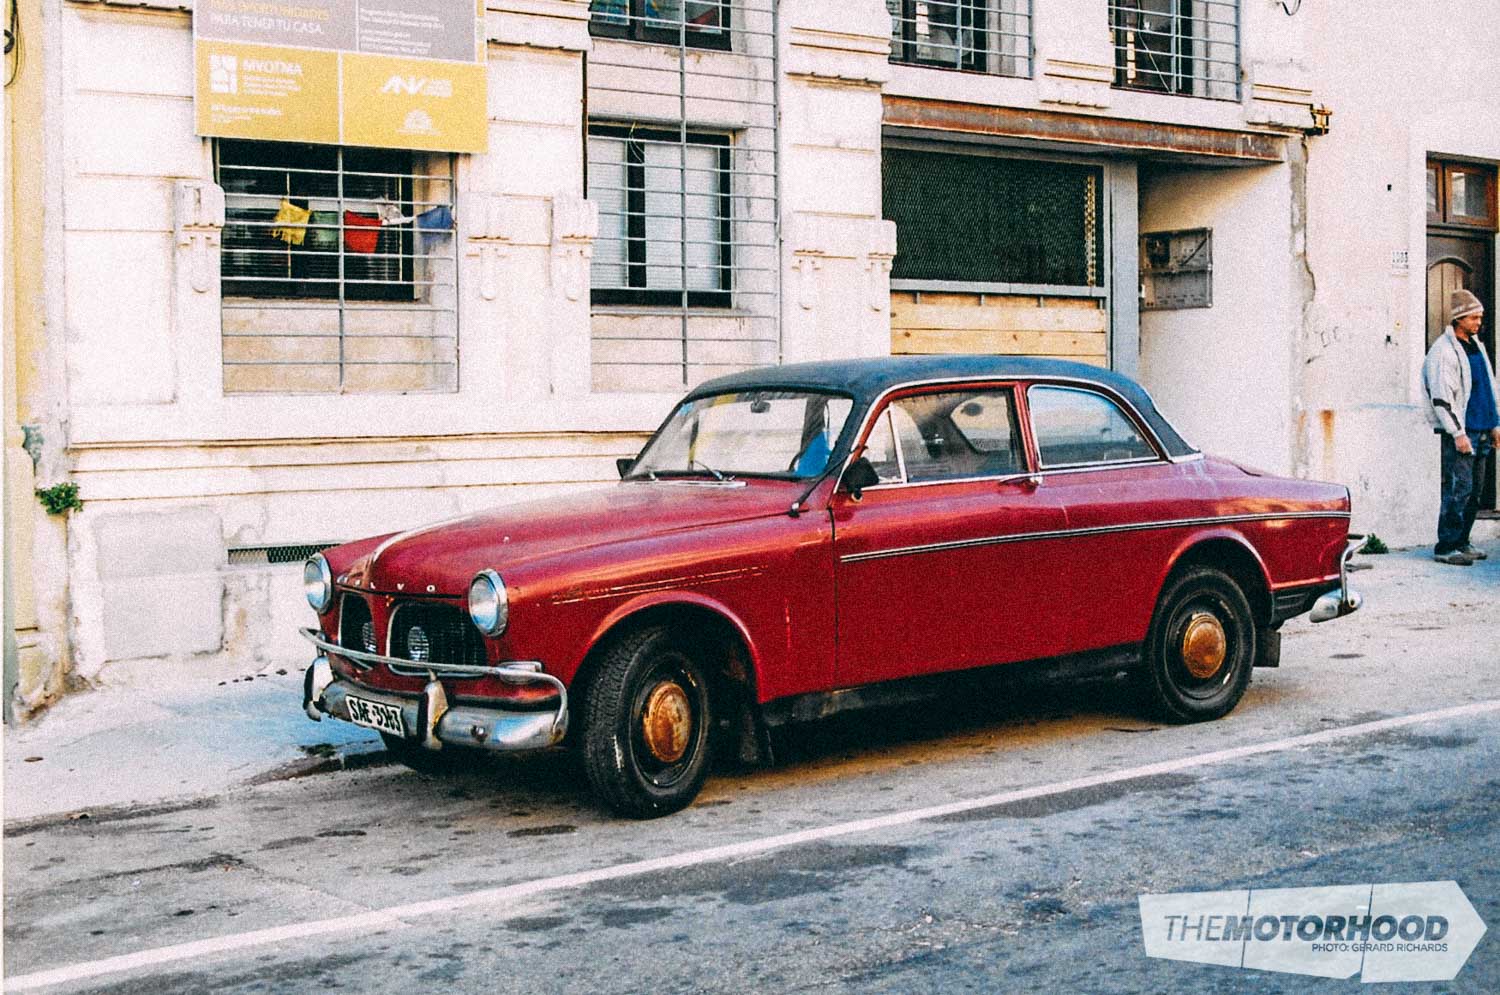 This Volvo Amazon looked fairly straight. Spotted in Palermo, Buenos Aires